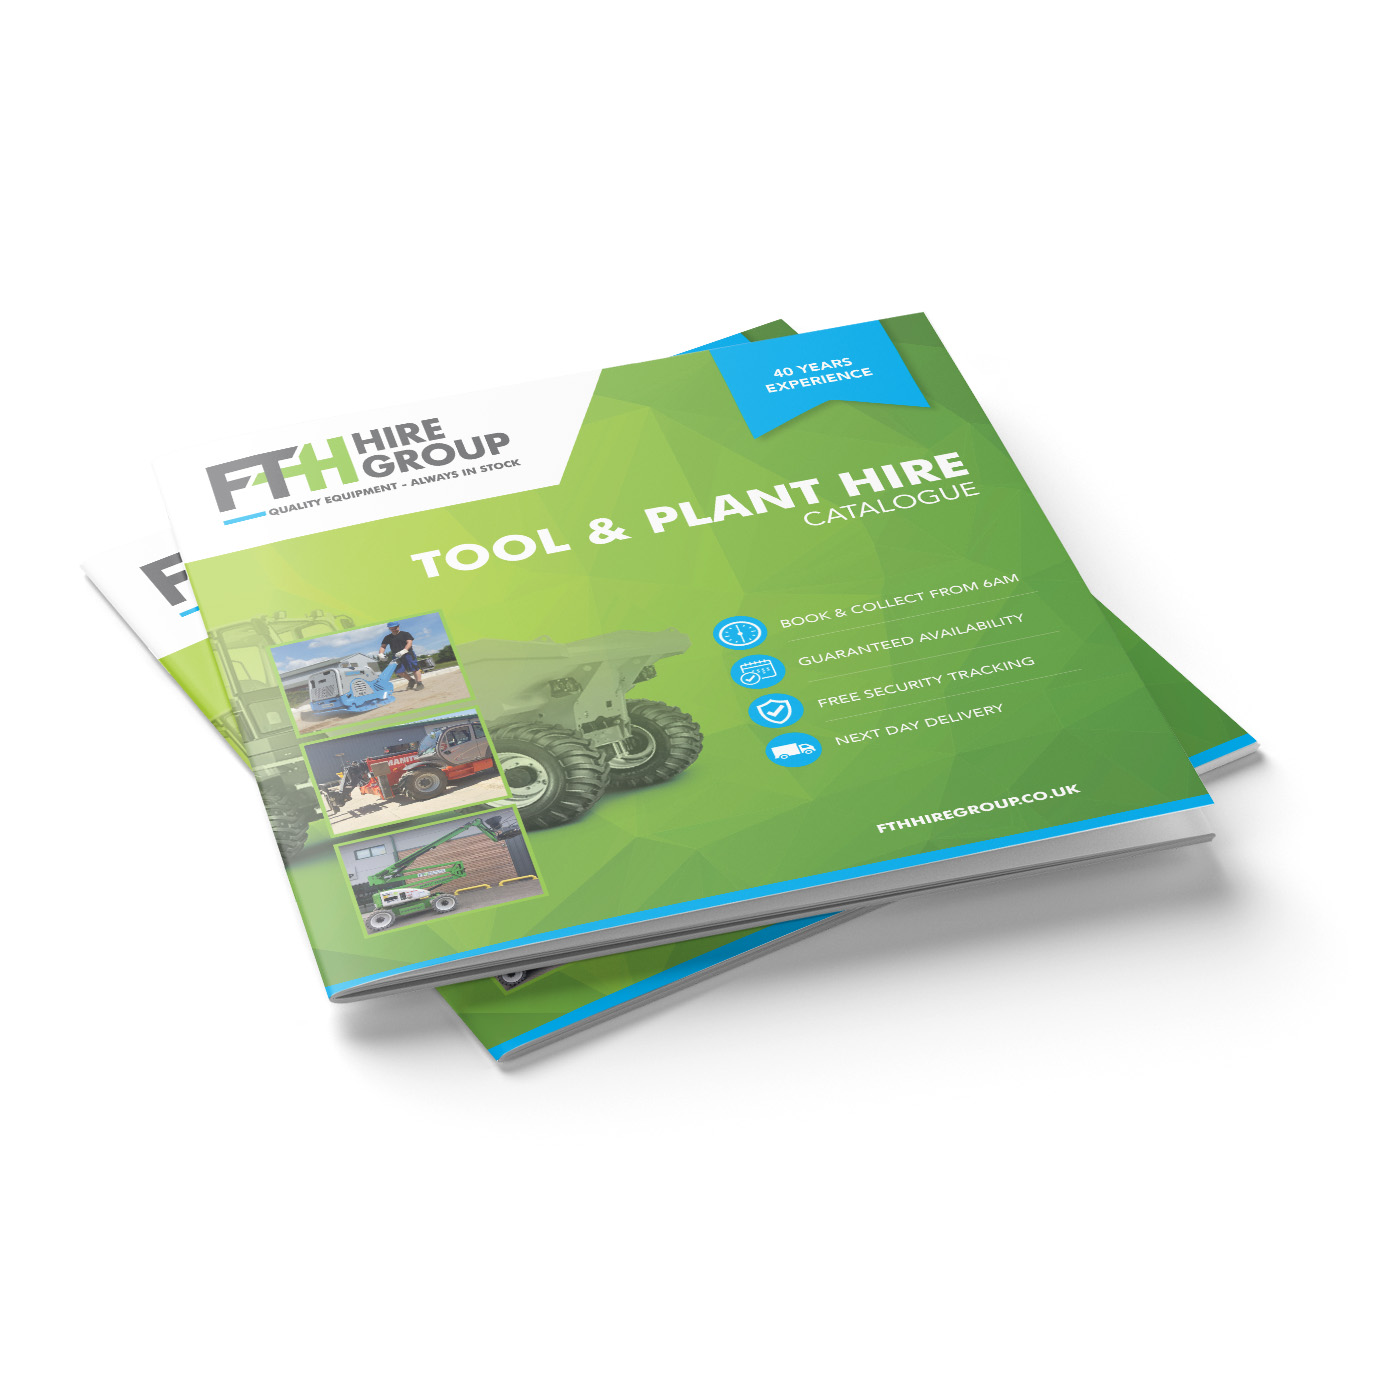 FTH Hire Group 2019 Catalogue